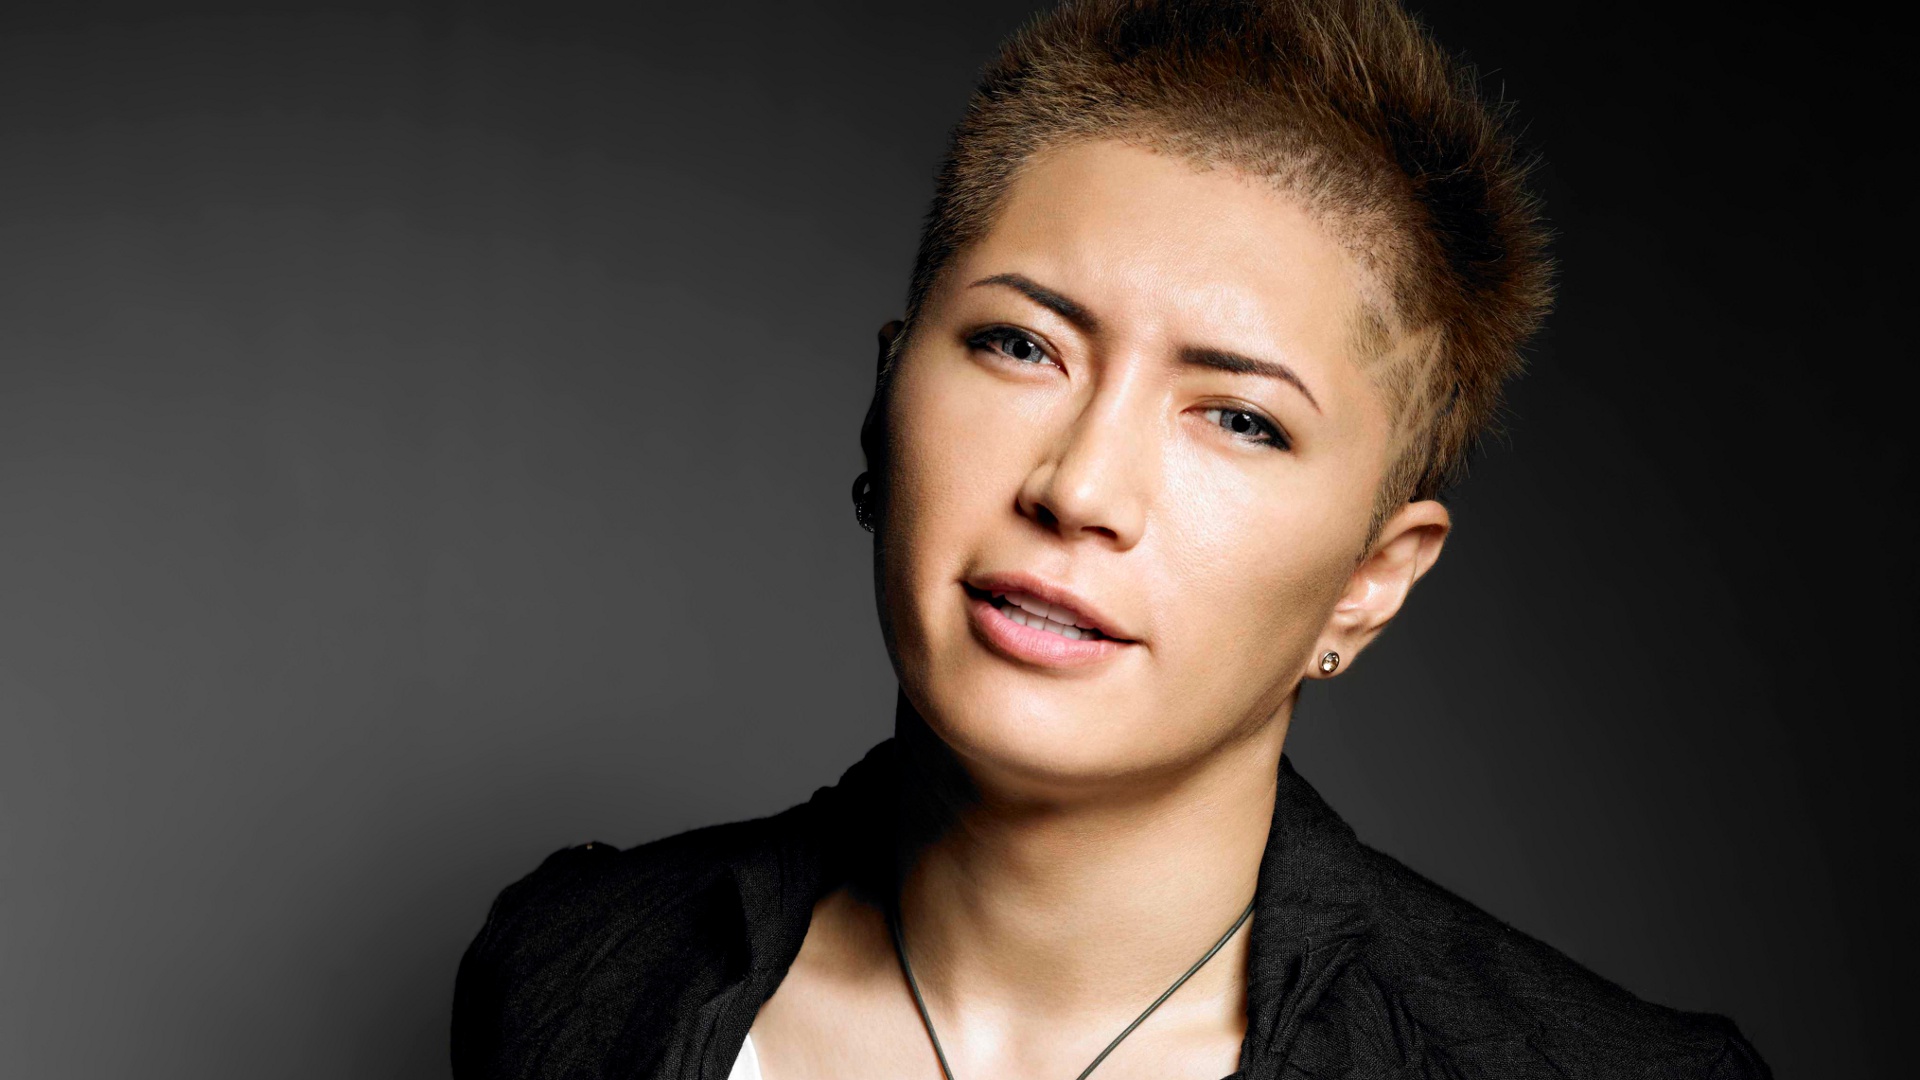 Gackt HD Wallpaper Background Image Id